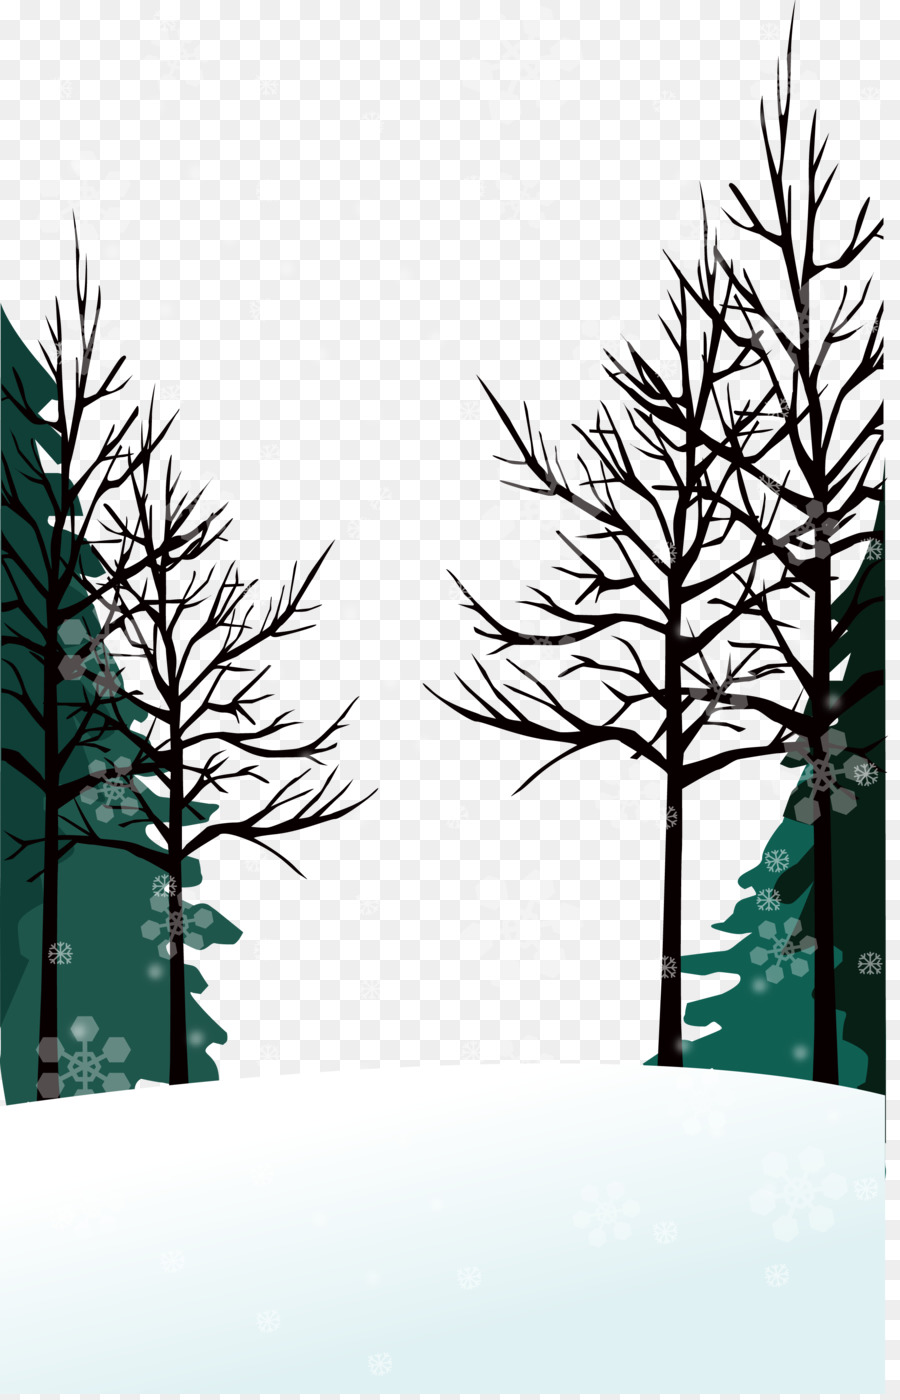 Winter Euclidean vector Wallpaper - Snowflake background woods png download - 2246*3478 - Free Transparent Winter png Download.